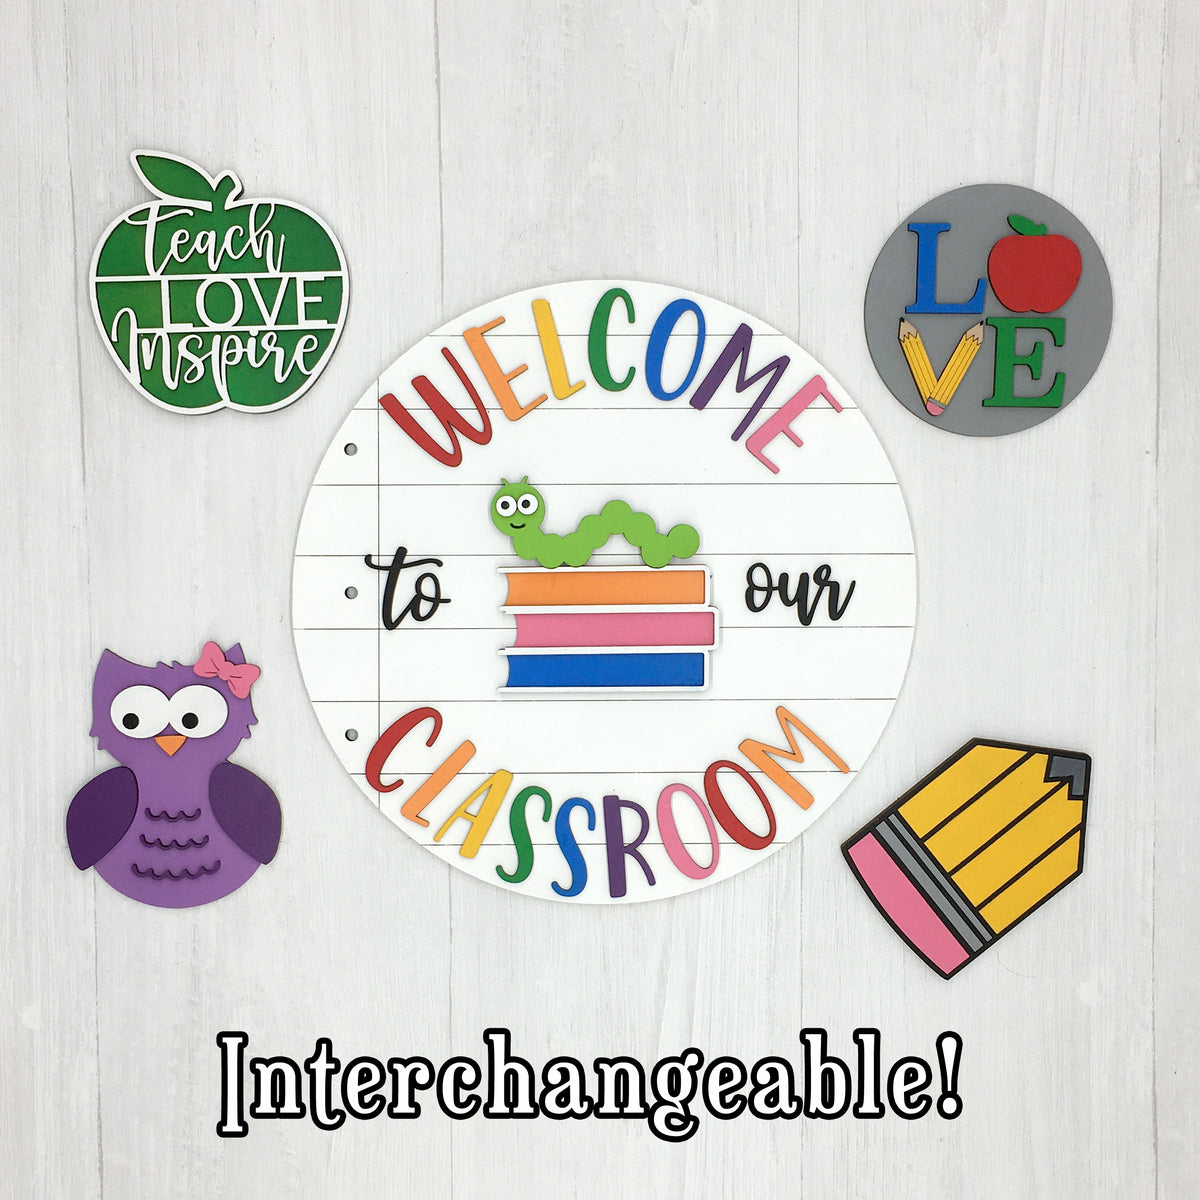 DIY or Finished Wooden Welcome to Our Classroom Interchangeable Sign